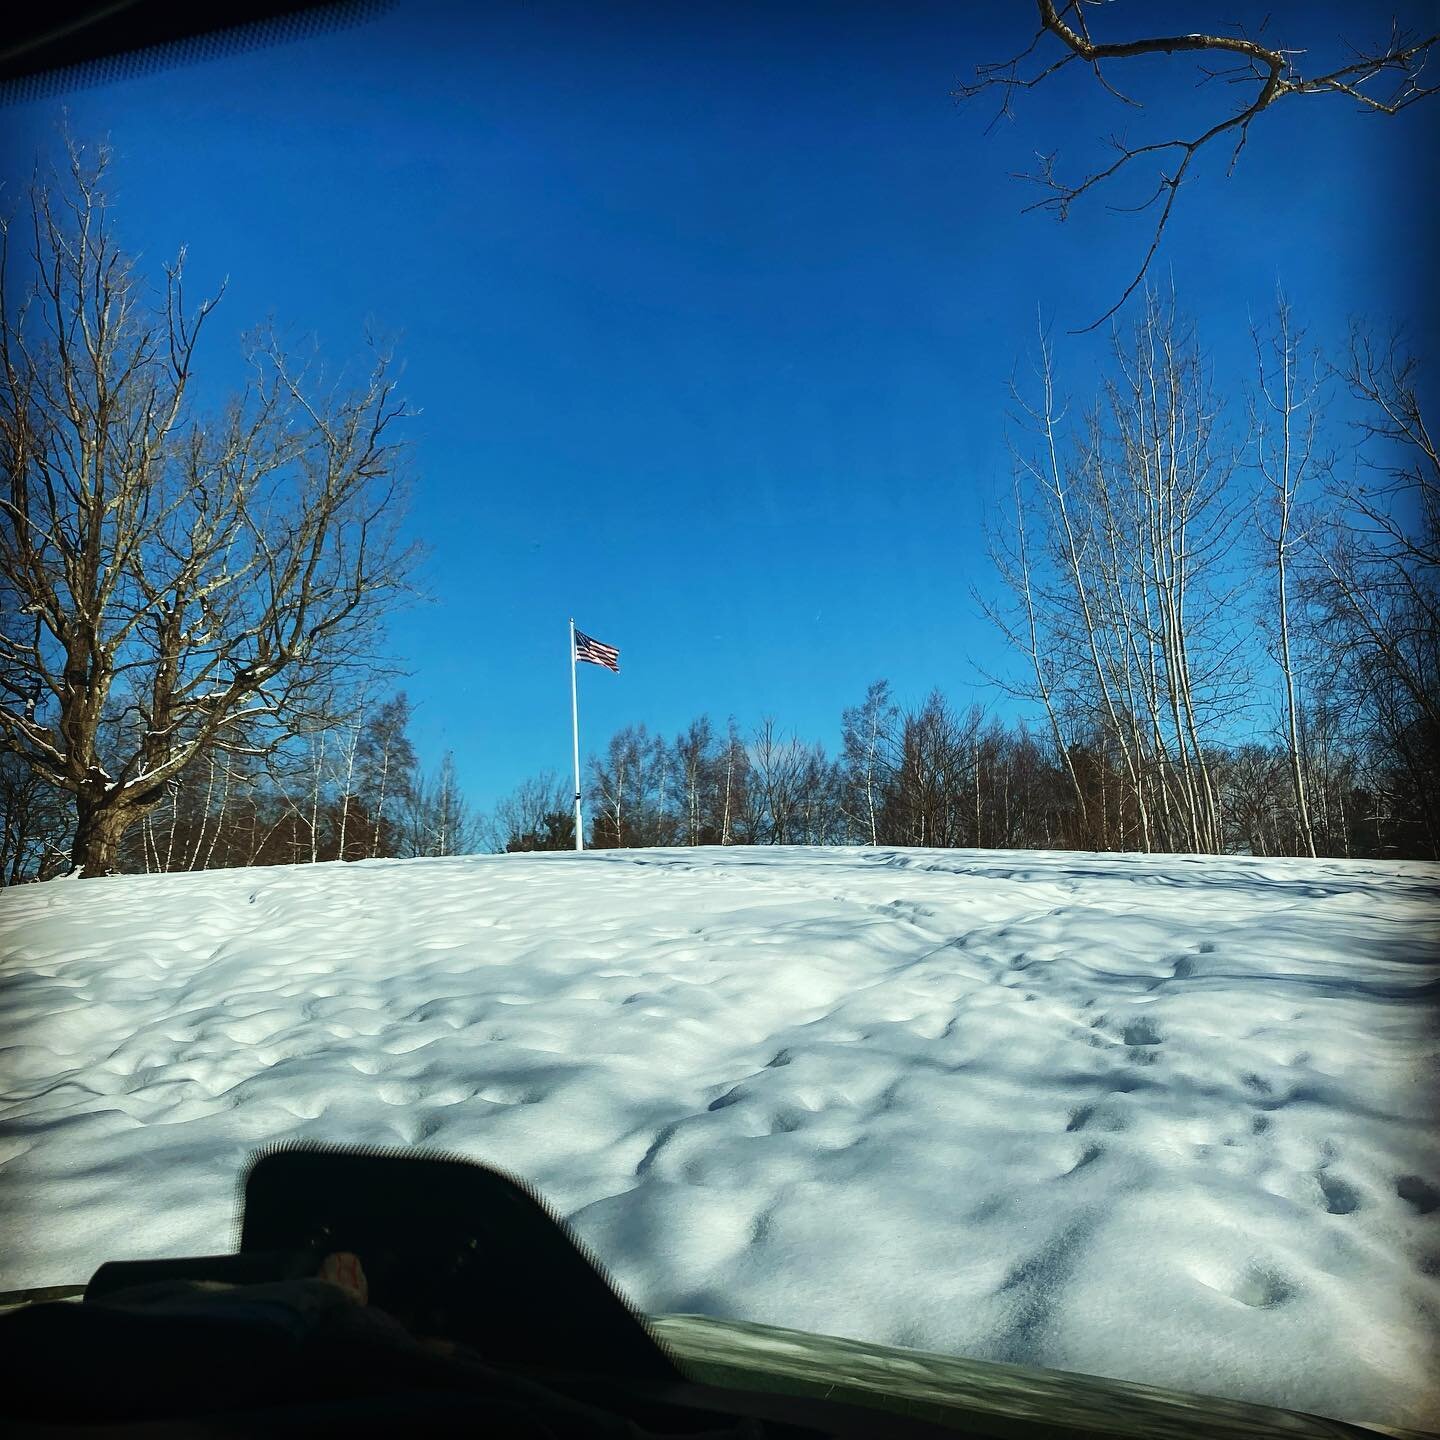 Friends of Newton Hill are taking advantage of the fresh snow and are grooming the Nordic course at both Newton Hill and Elm Park this morning! Beautiful day to get out and enjoy Worcester&rsquo;s only formal winter recreational destination 😎

Nordi